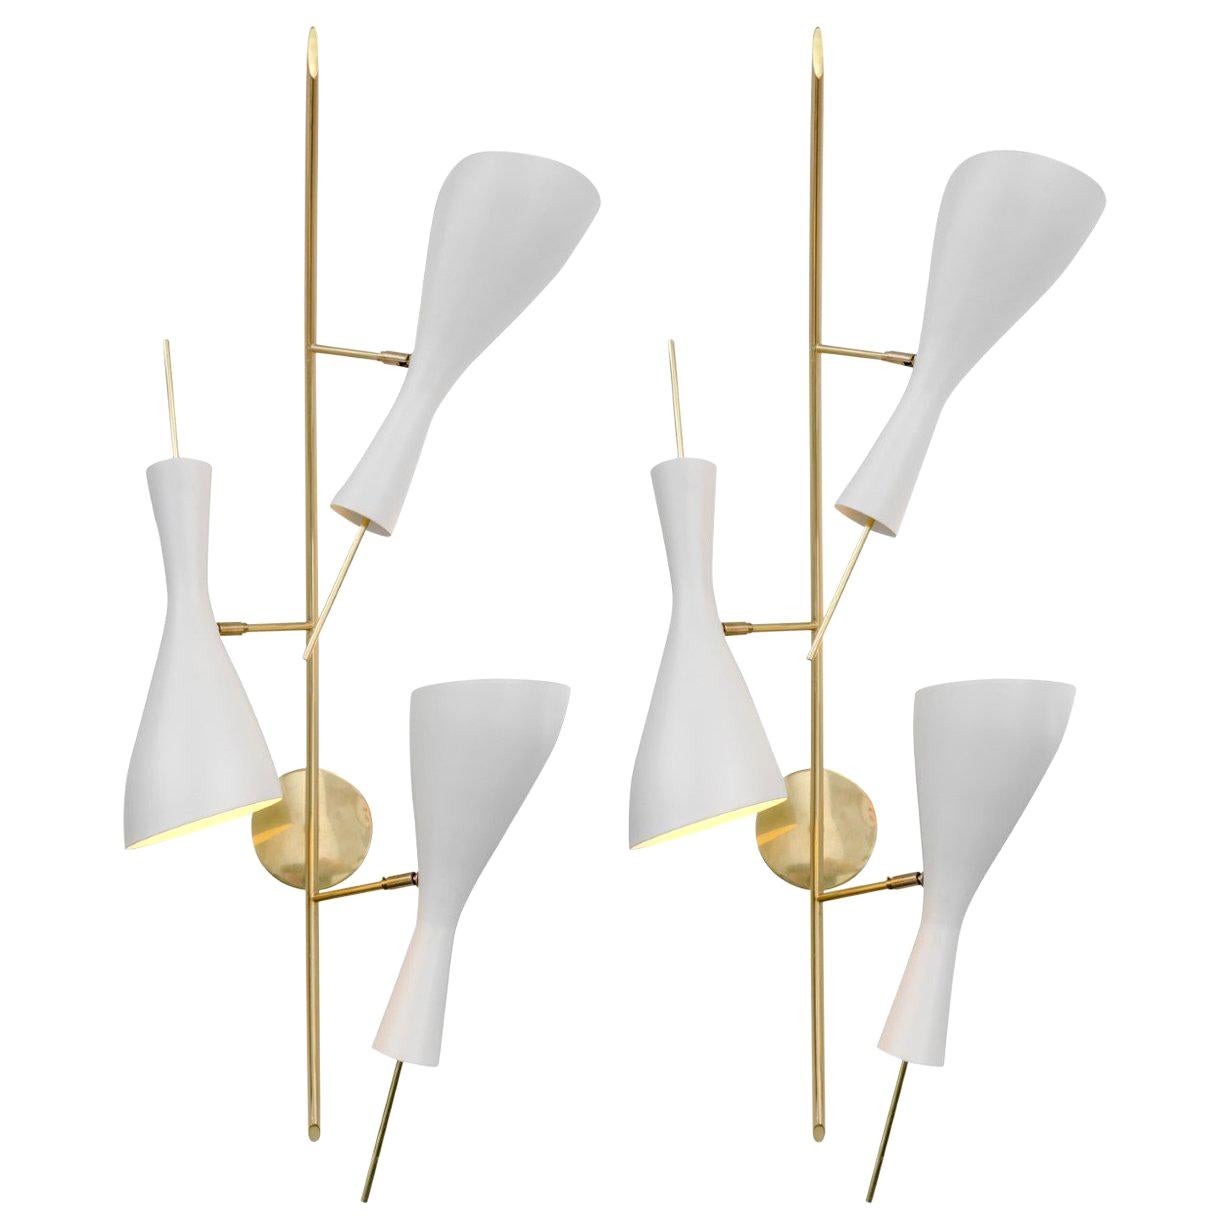 Three Brass and White Metal Shade Midcentury Style Sconces, Italy, 2018